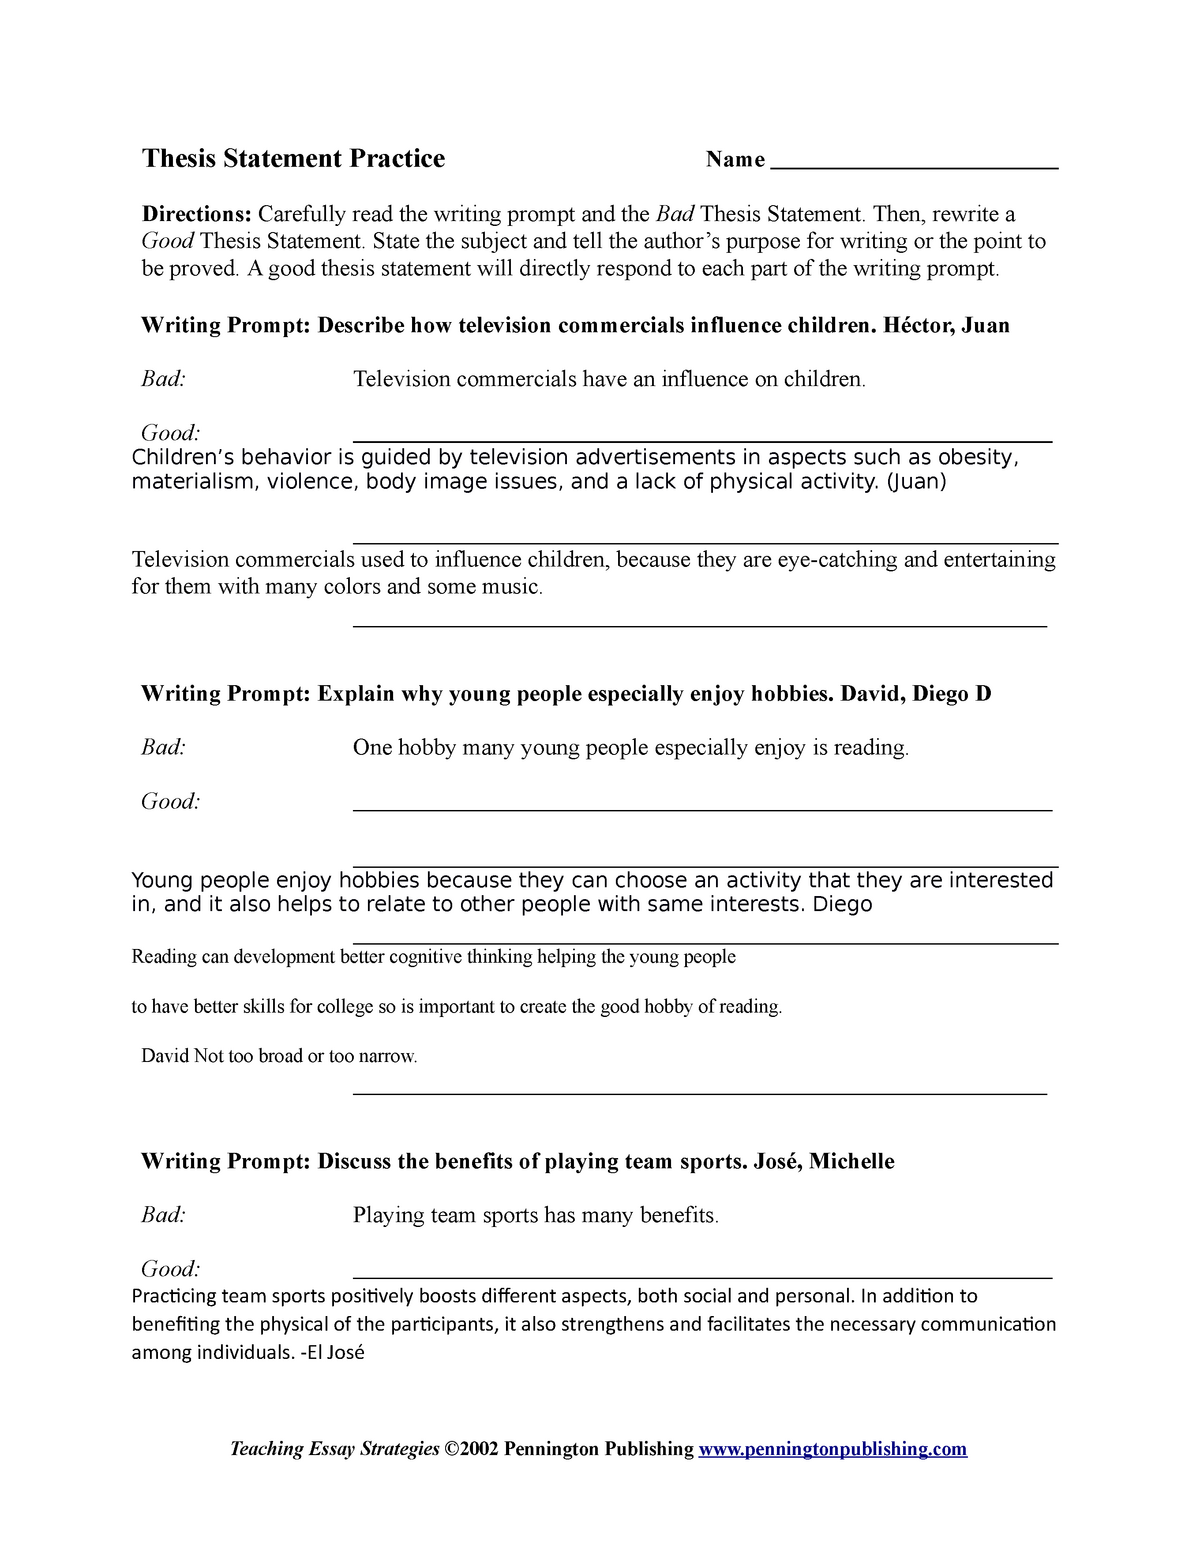 Thesis statement practice - ENGL 21 - Intro English Grammar Regarding Thesis Statement Practice Worksheet